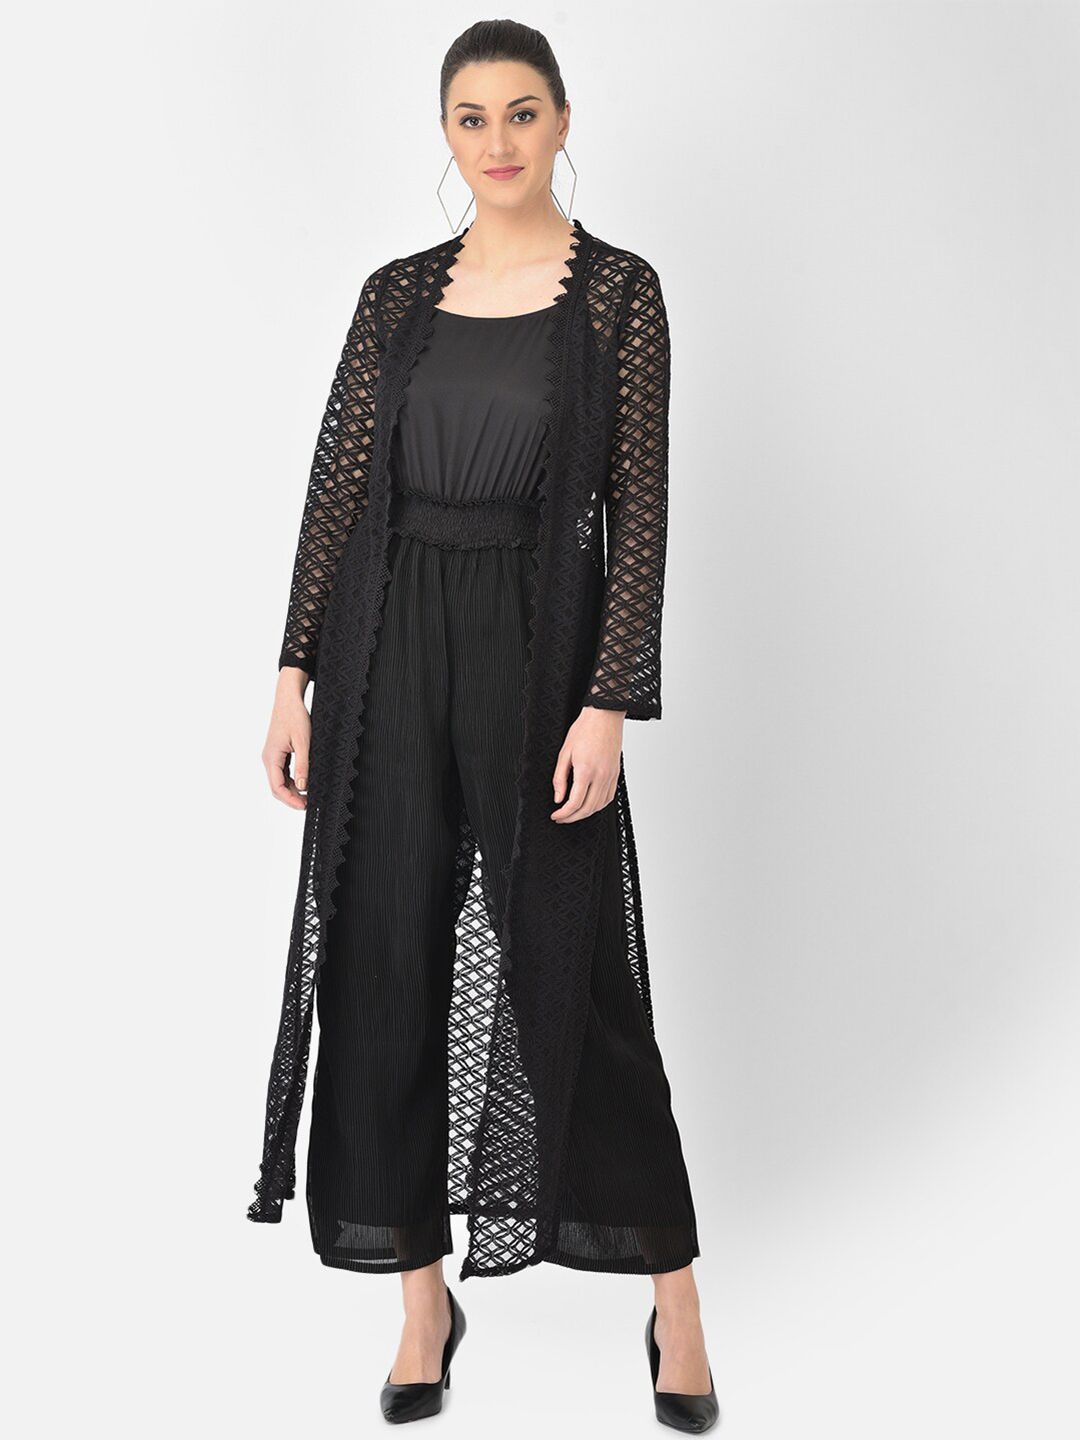 Eavan Black Basic Jumpsuit with Lace Jacket Price in India